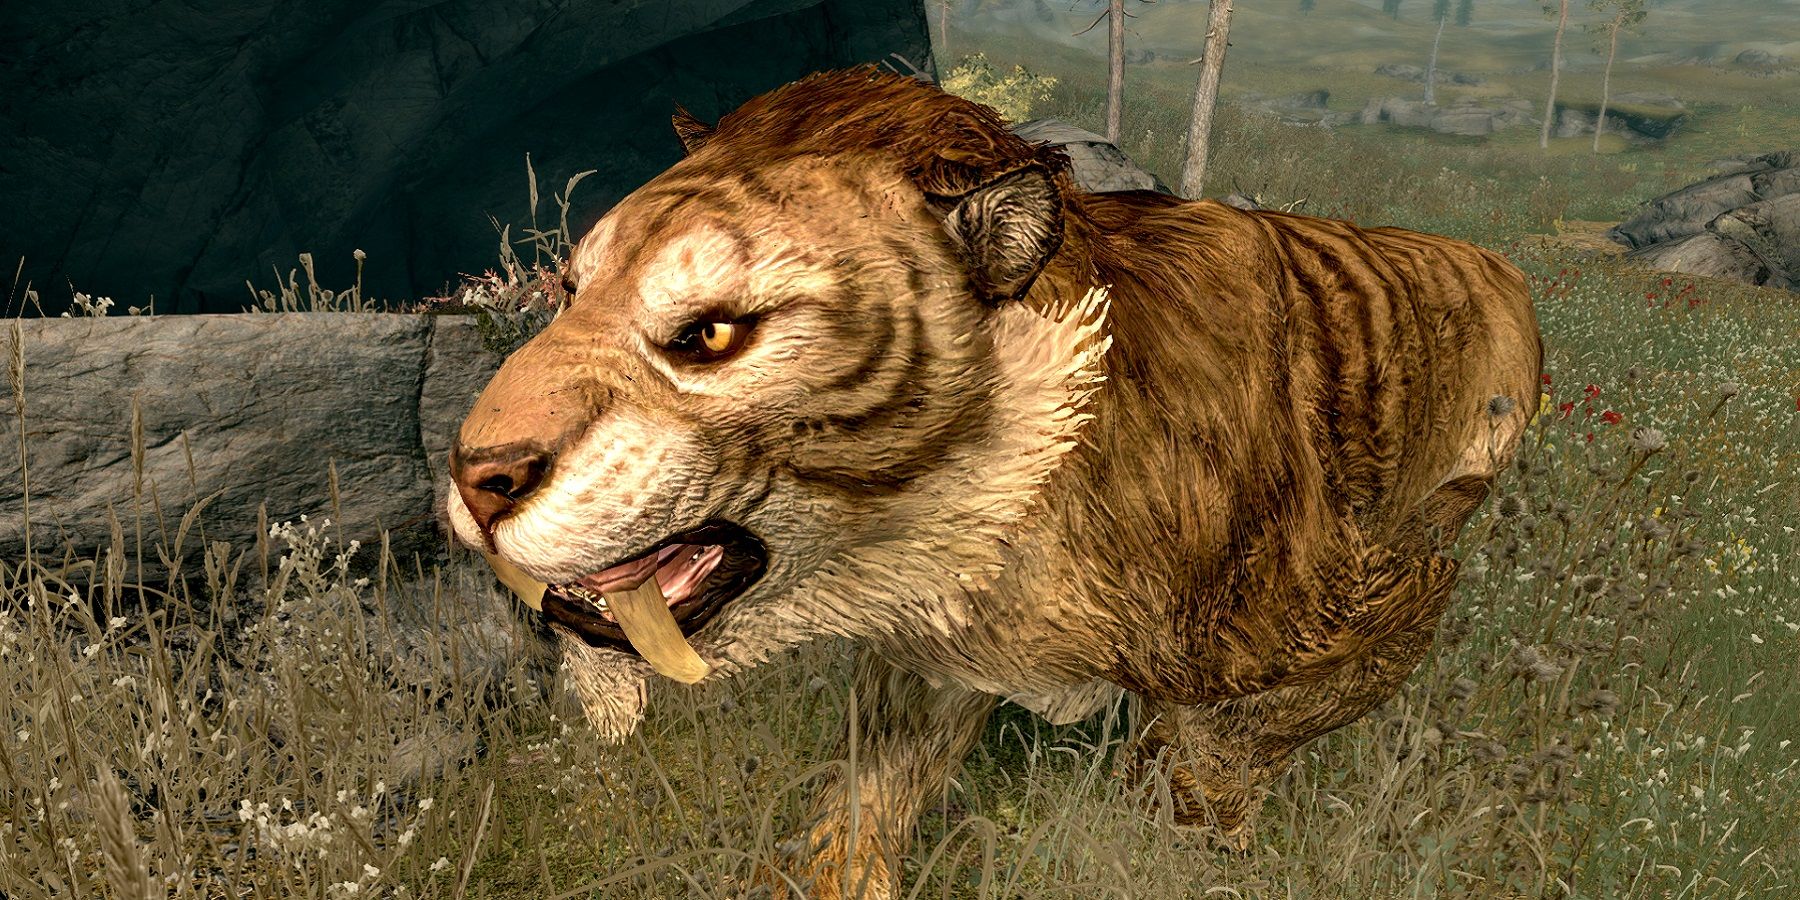 Image from The Elder Scrolls 5: Skyrim showing a high resolution close-up of a sabre cat.